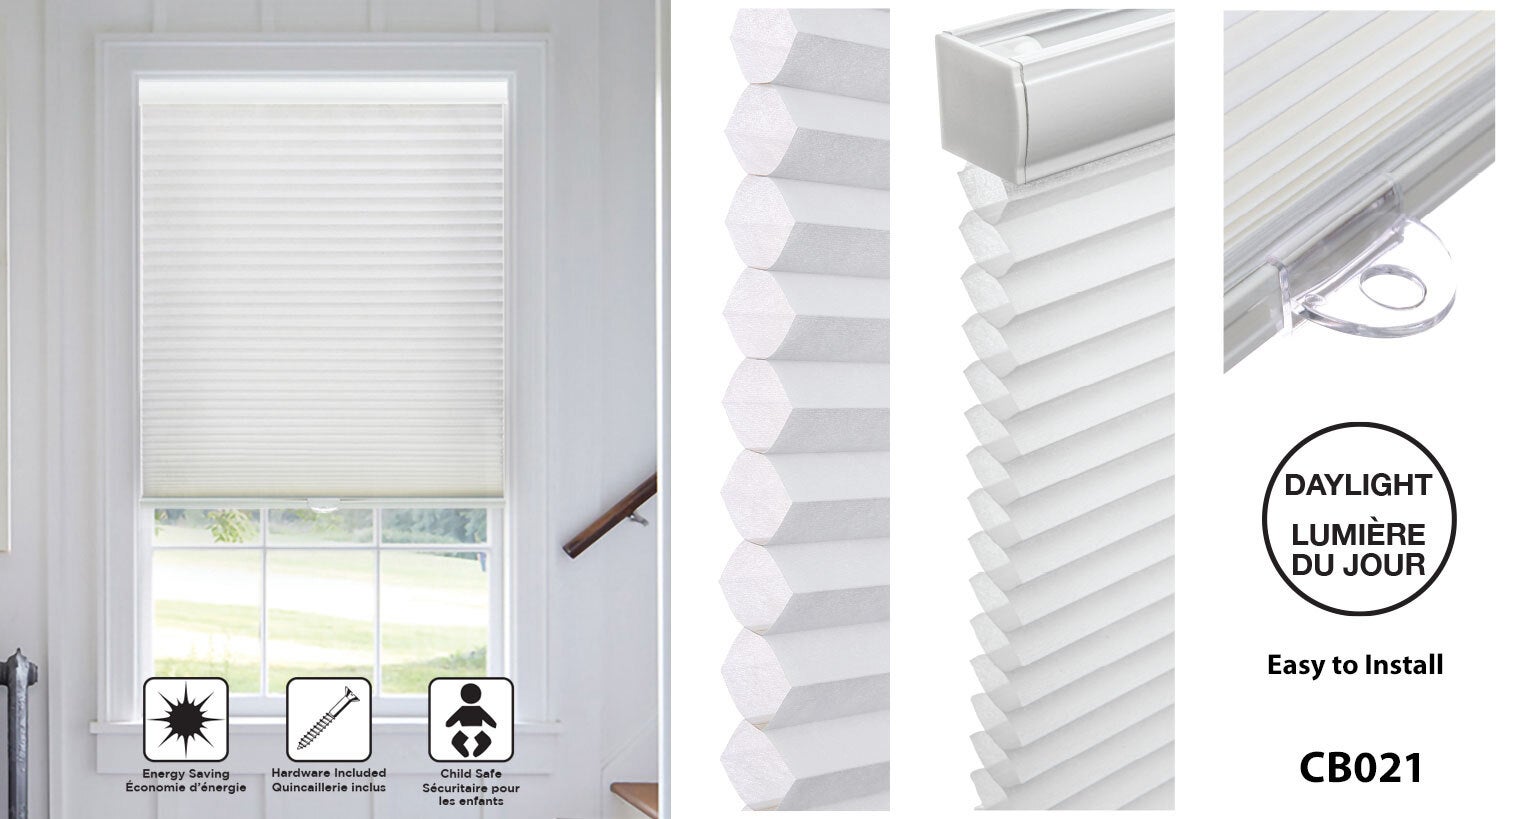 Dometic S7 PLEATED BLIND 913X422MM